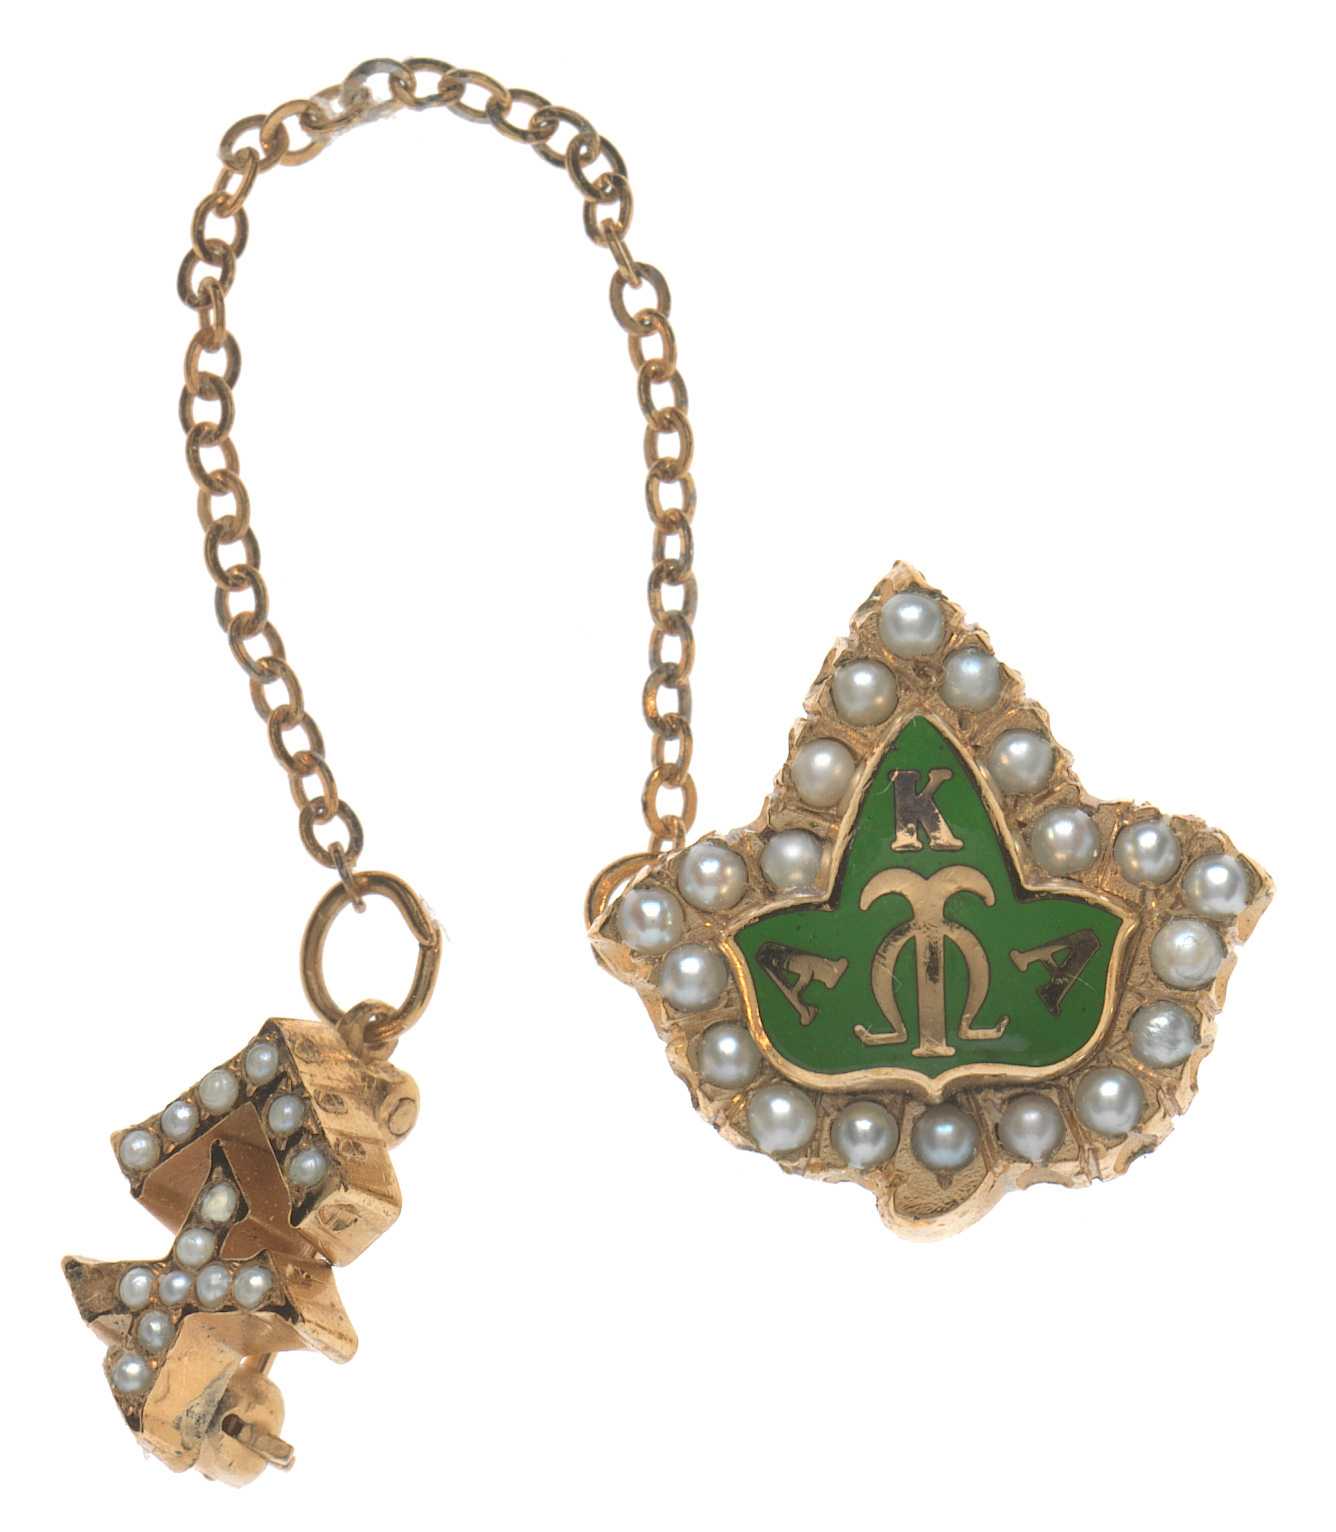 An Alpha Kappa Alpha members badge with a stickpin back. The badge is in the shape of an ivy leaf with a green center.